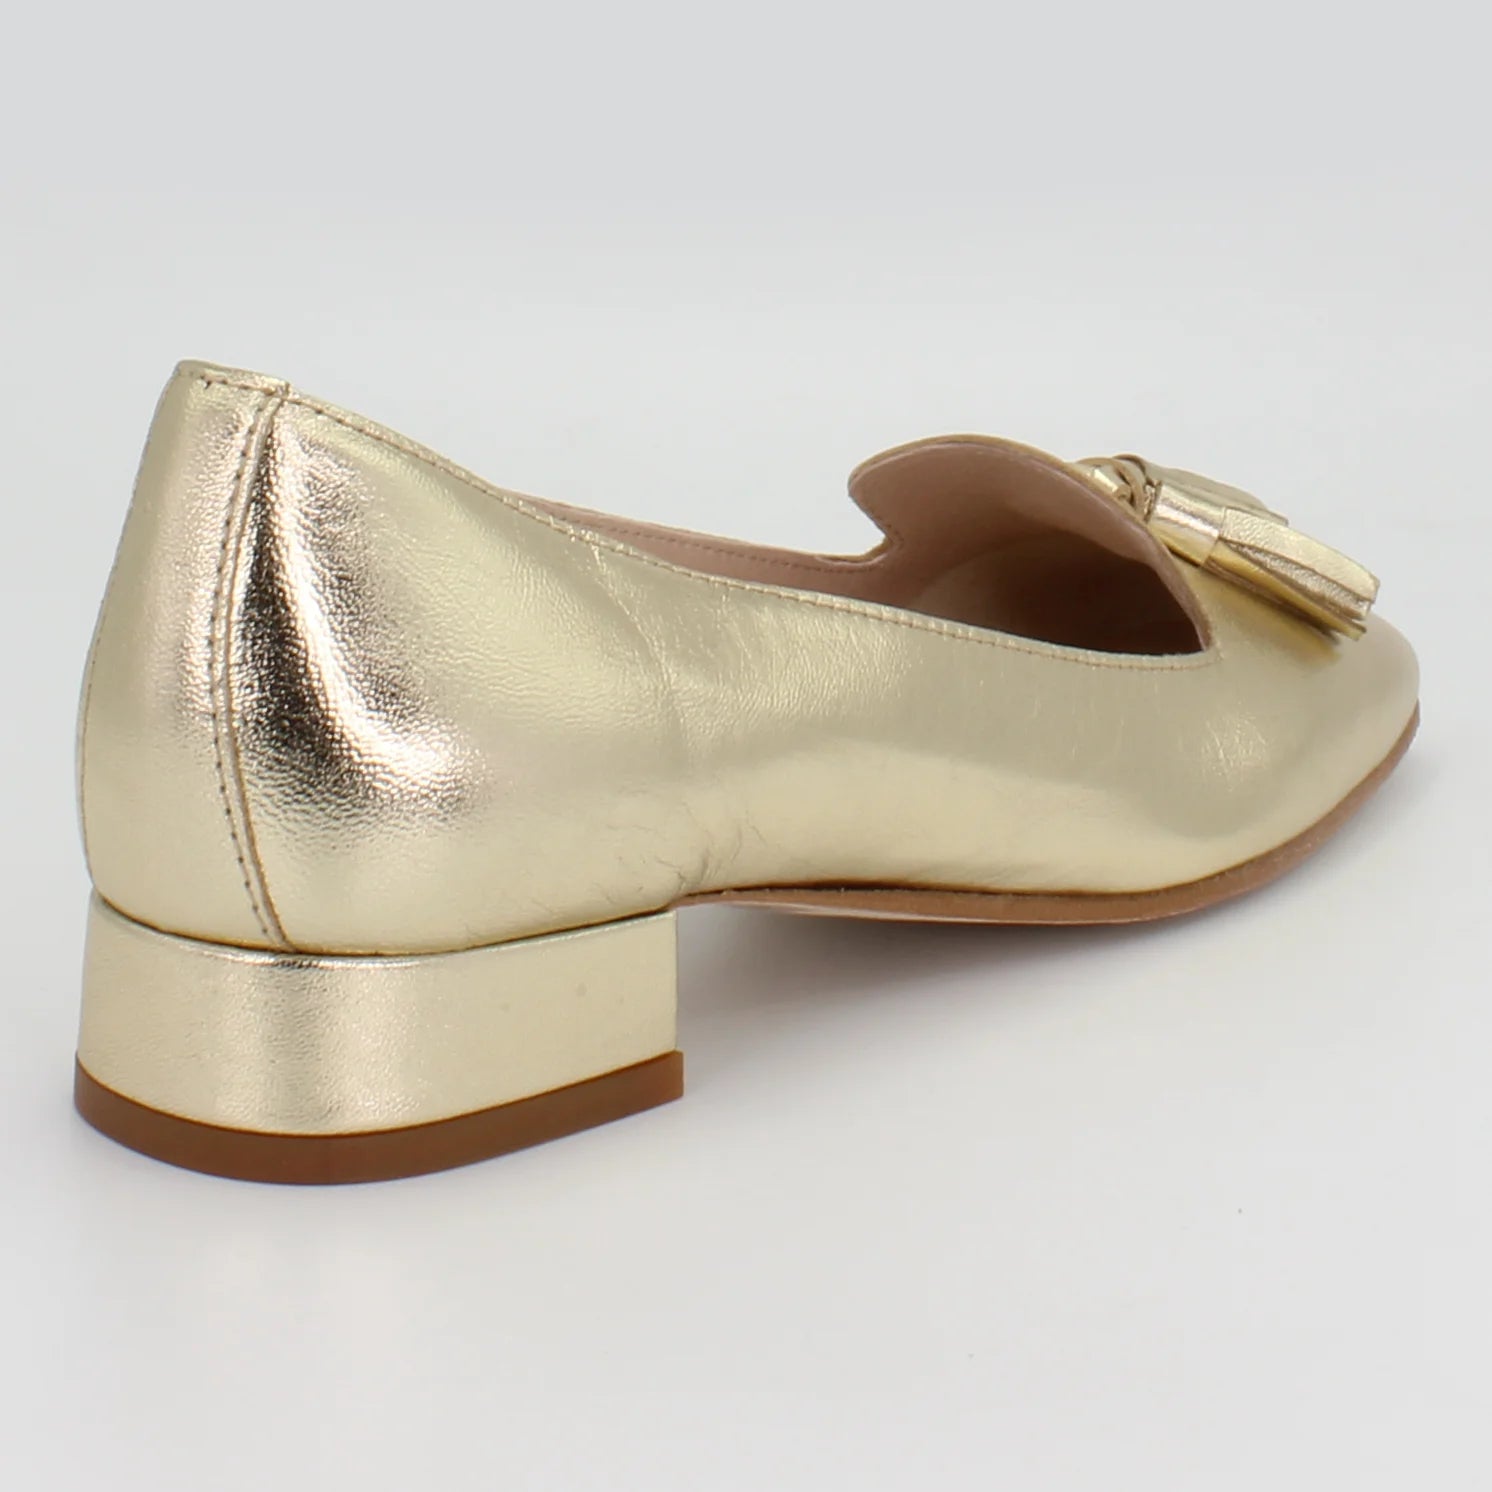 Shop Handmade Italian Leather tassle ballerina pump in platino gold (E328T) or browse our range of hand-made Italian shoes in leather or suede in-store at Aliverti Cape Town, or shop online. We deliver in South Africa & offer multiple payment plans as well as accept multiple safe & secure payment methods.